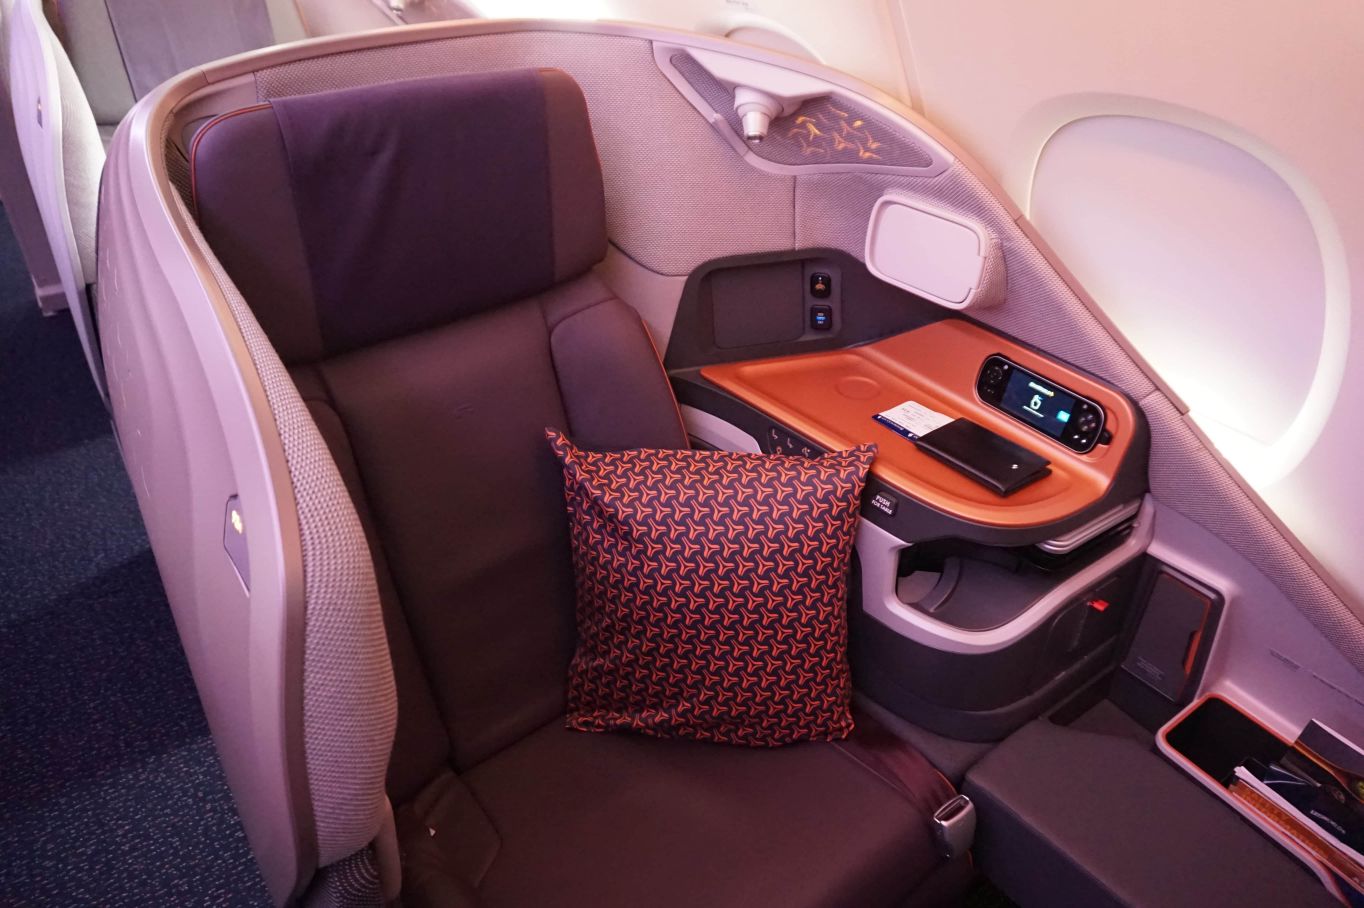 singapore airlines add travel insurance